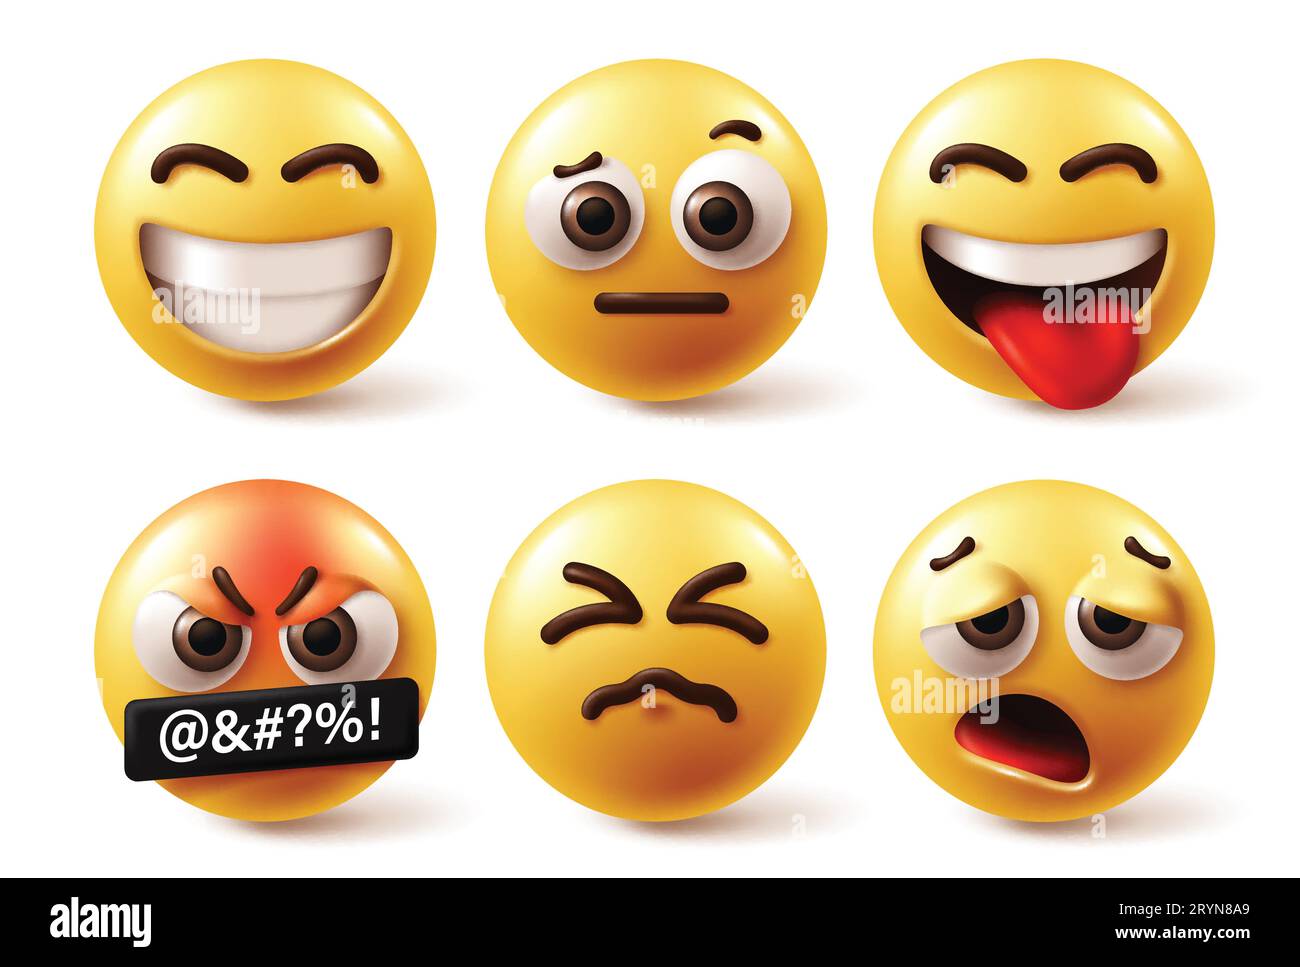 Emojis emoticon vector set. Emoticons emoji character yellow icon collection in happy, smile, confused, naughty, mad, angry and sleepy facial Stock Vector